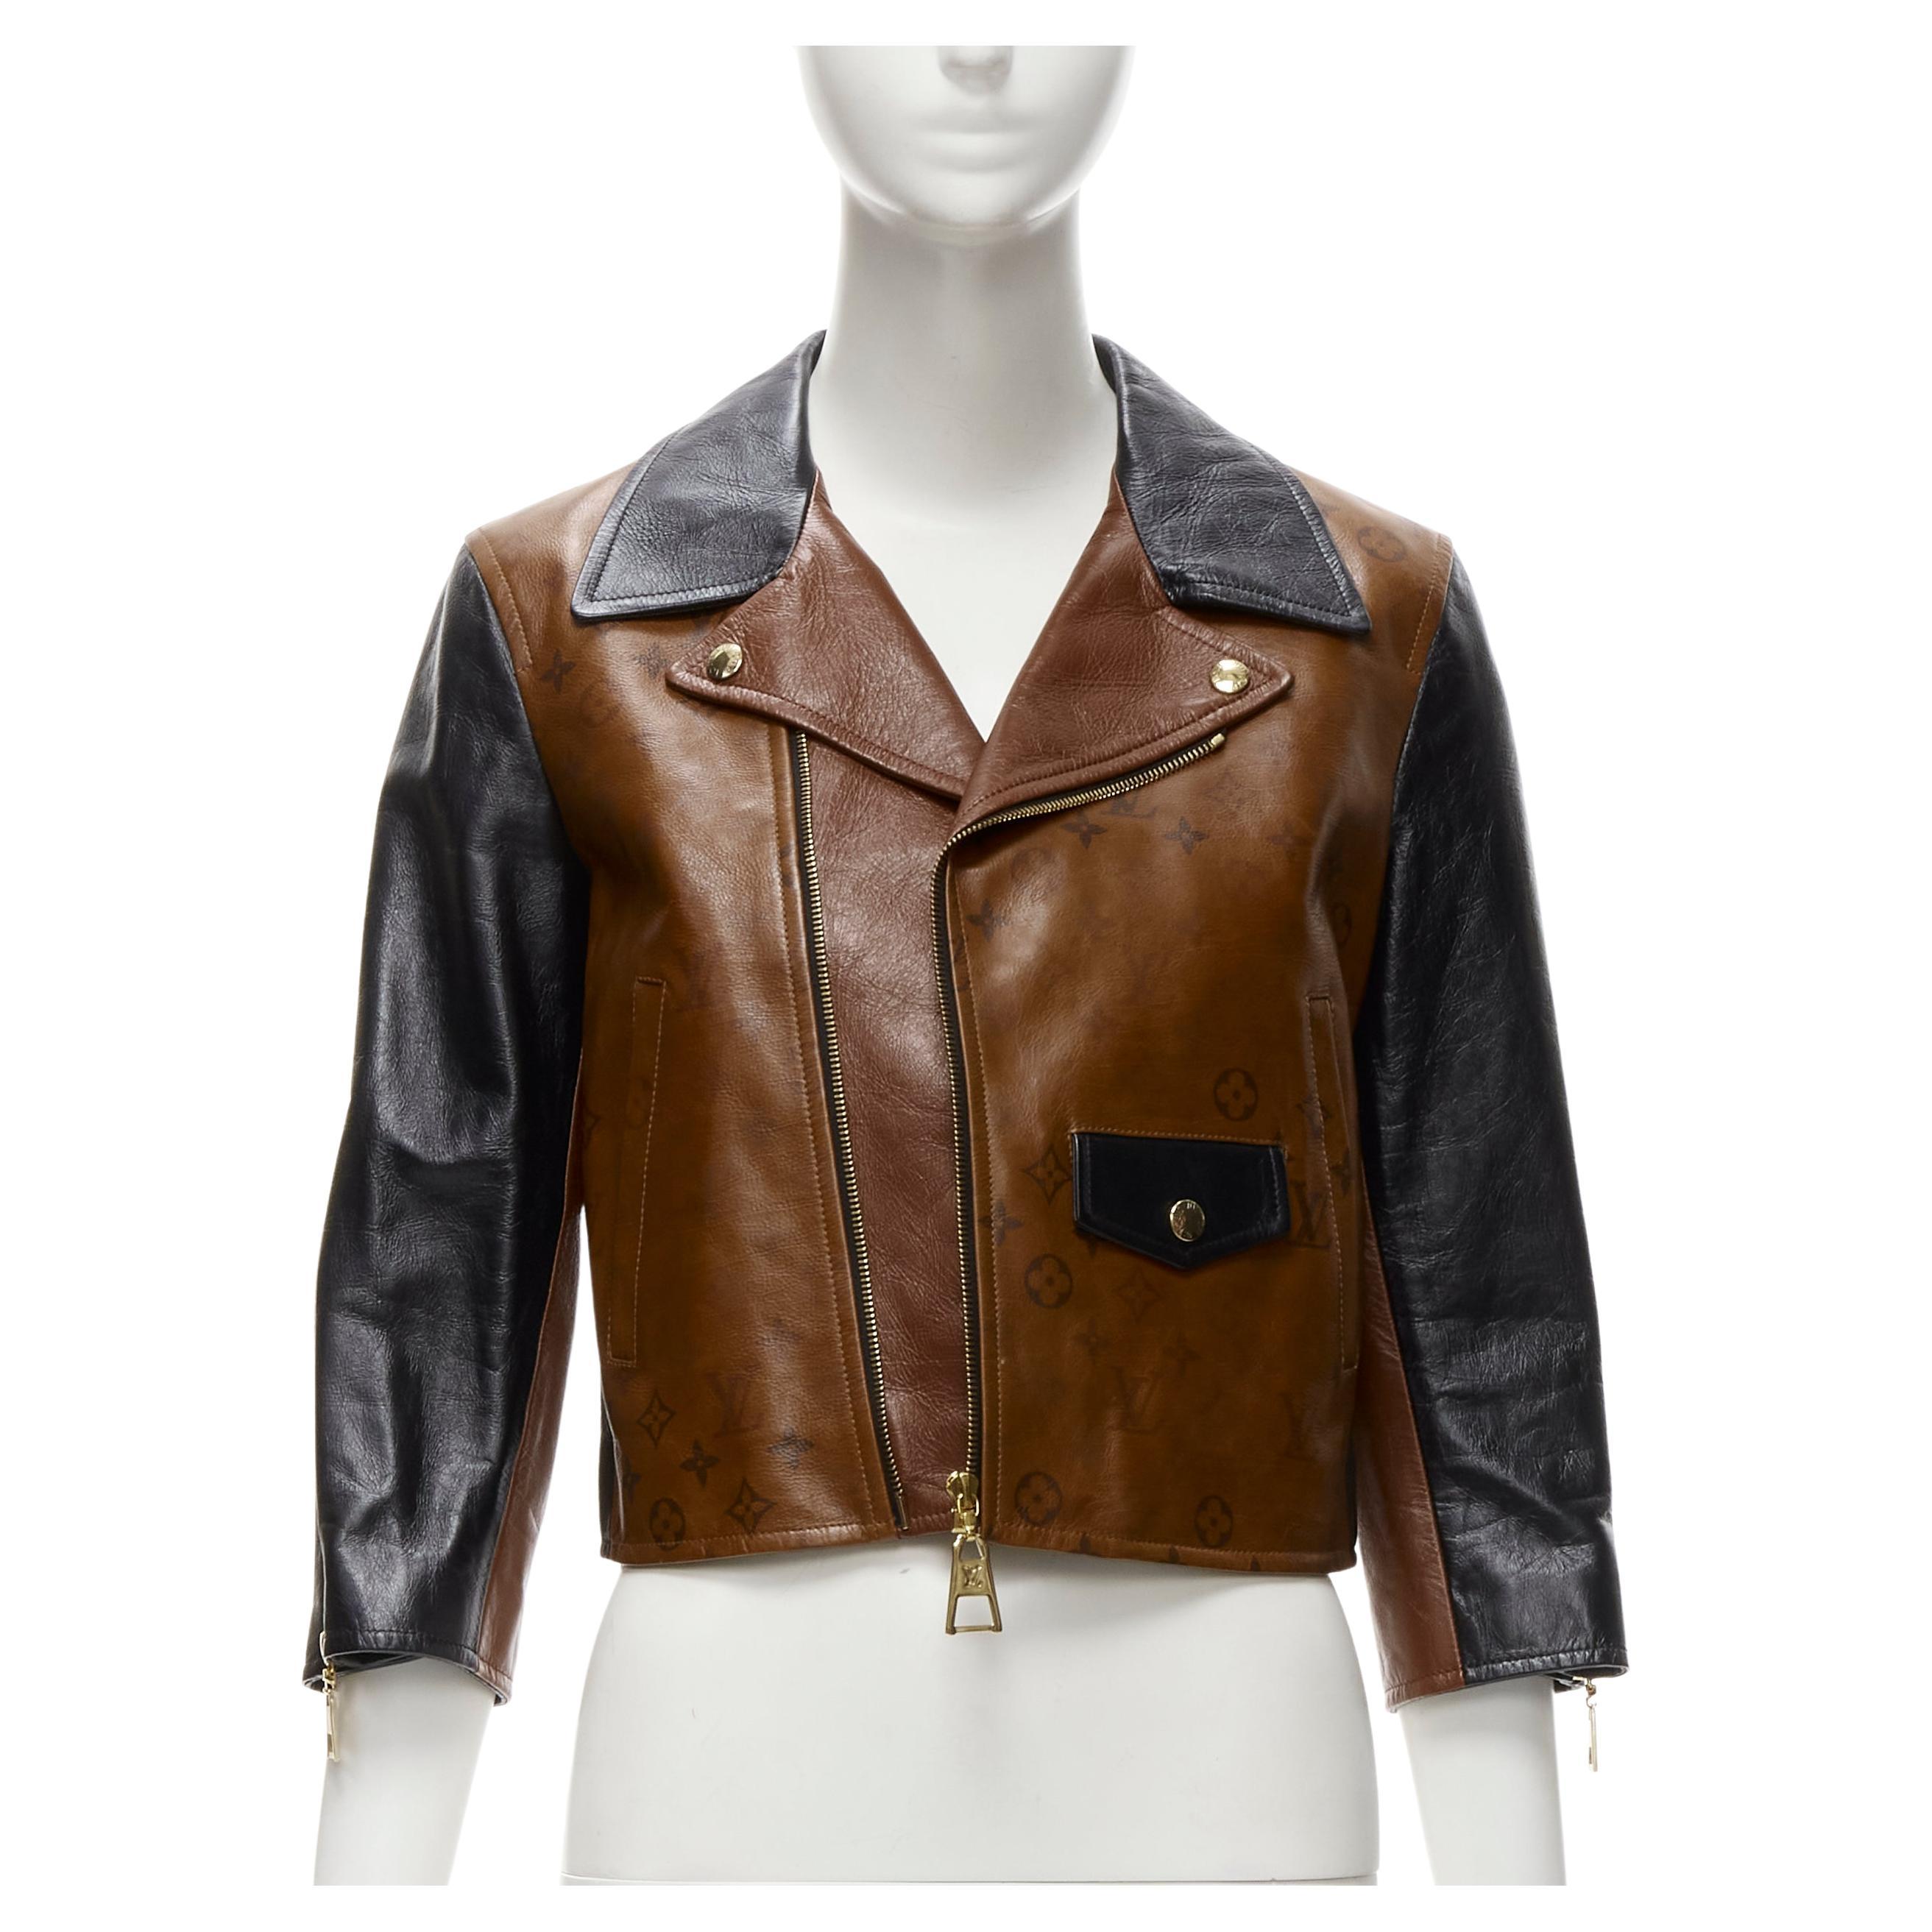 Louis Vuitton Monogram Leather Jacket - 2 For Sale on 1stDibs